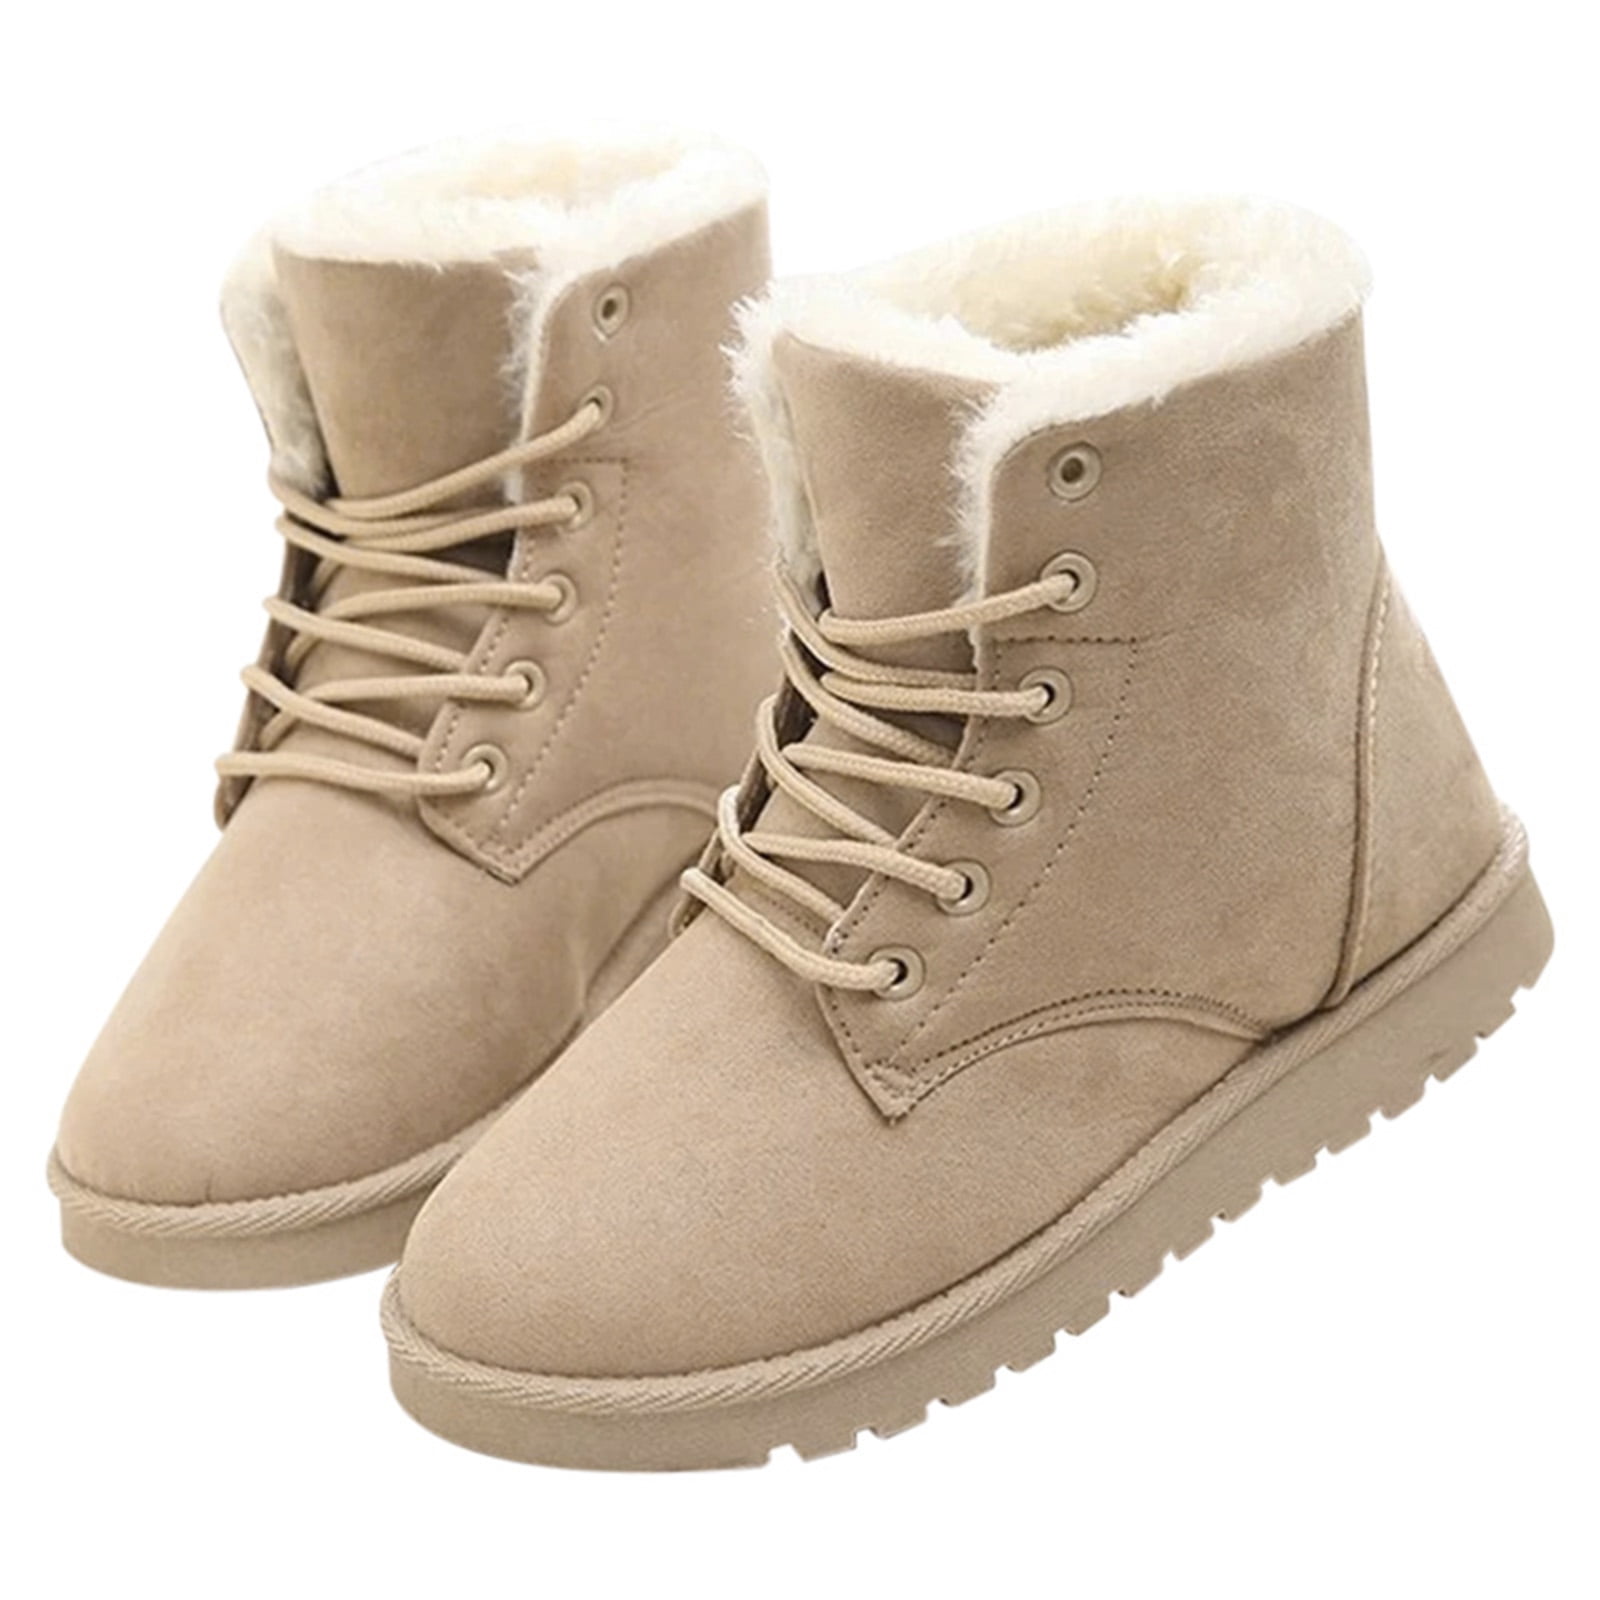 Womens Thicken Fleece Lined Ankle Snow Boots Winter Warm Waterproof Shoes B334